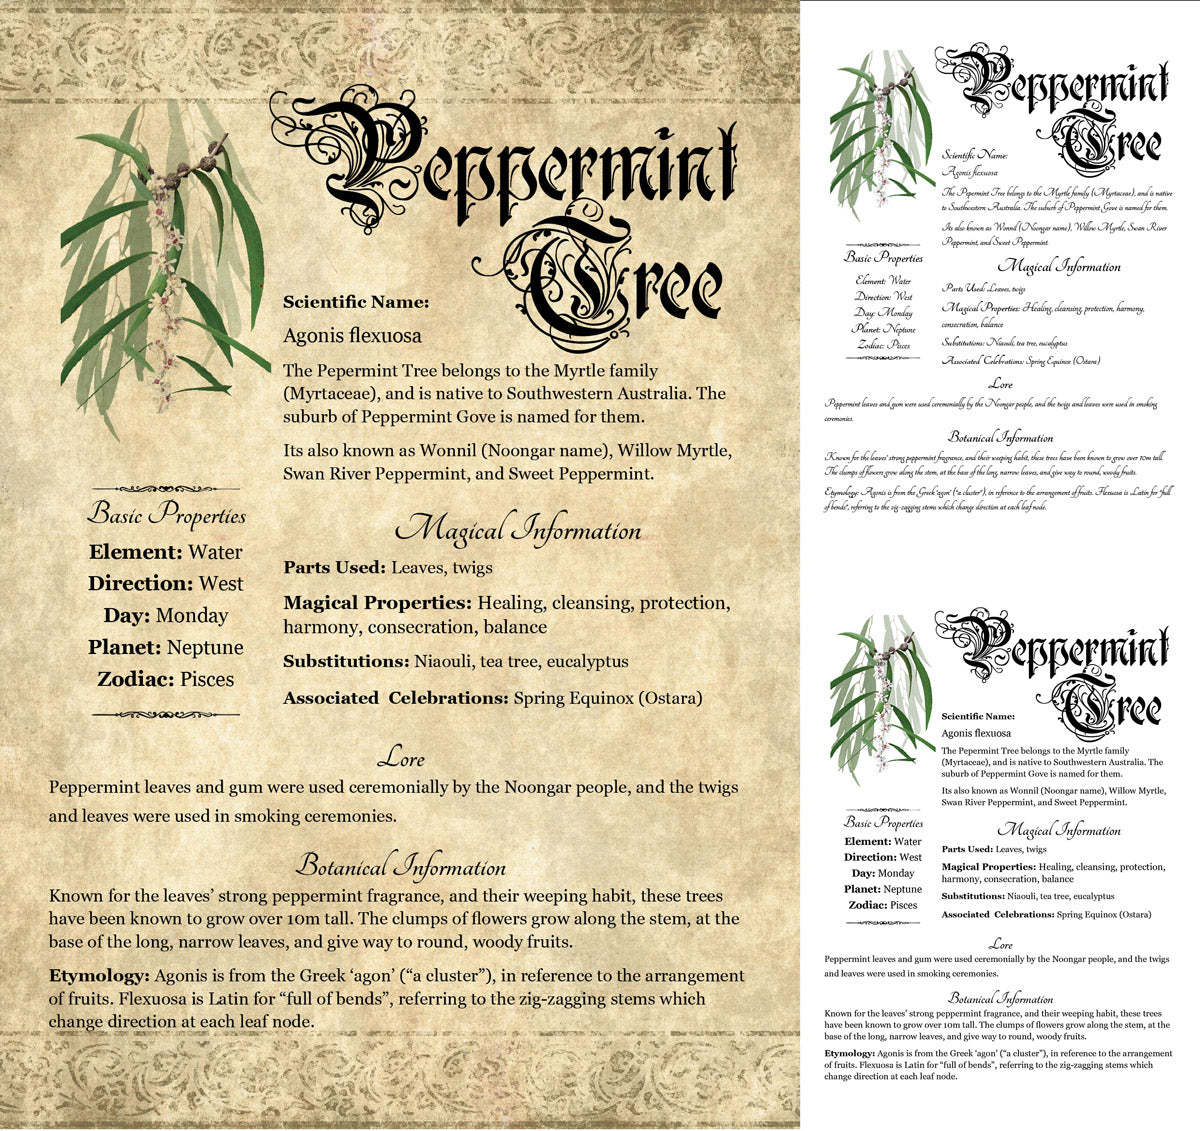 Collage of 3 versions of the Peppermint Tree grimoire page: with a readable/serif vs script font + with/without background